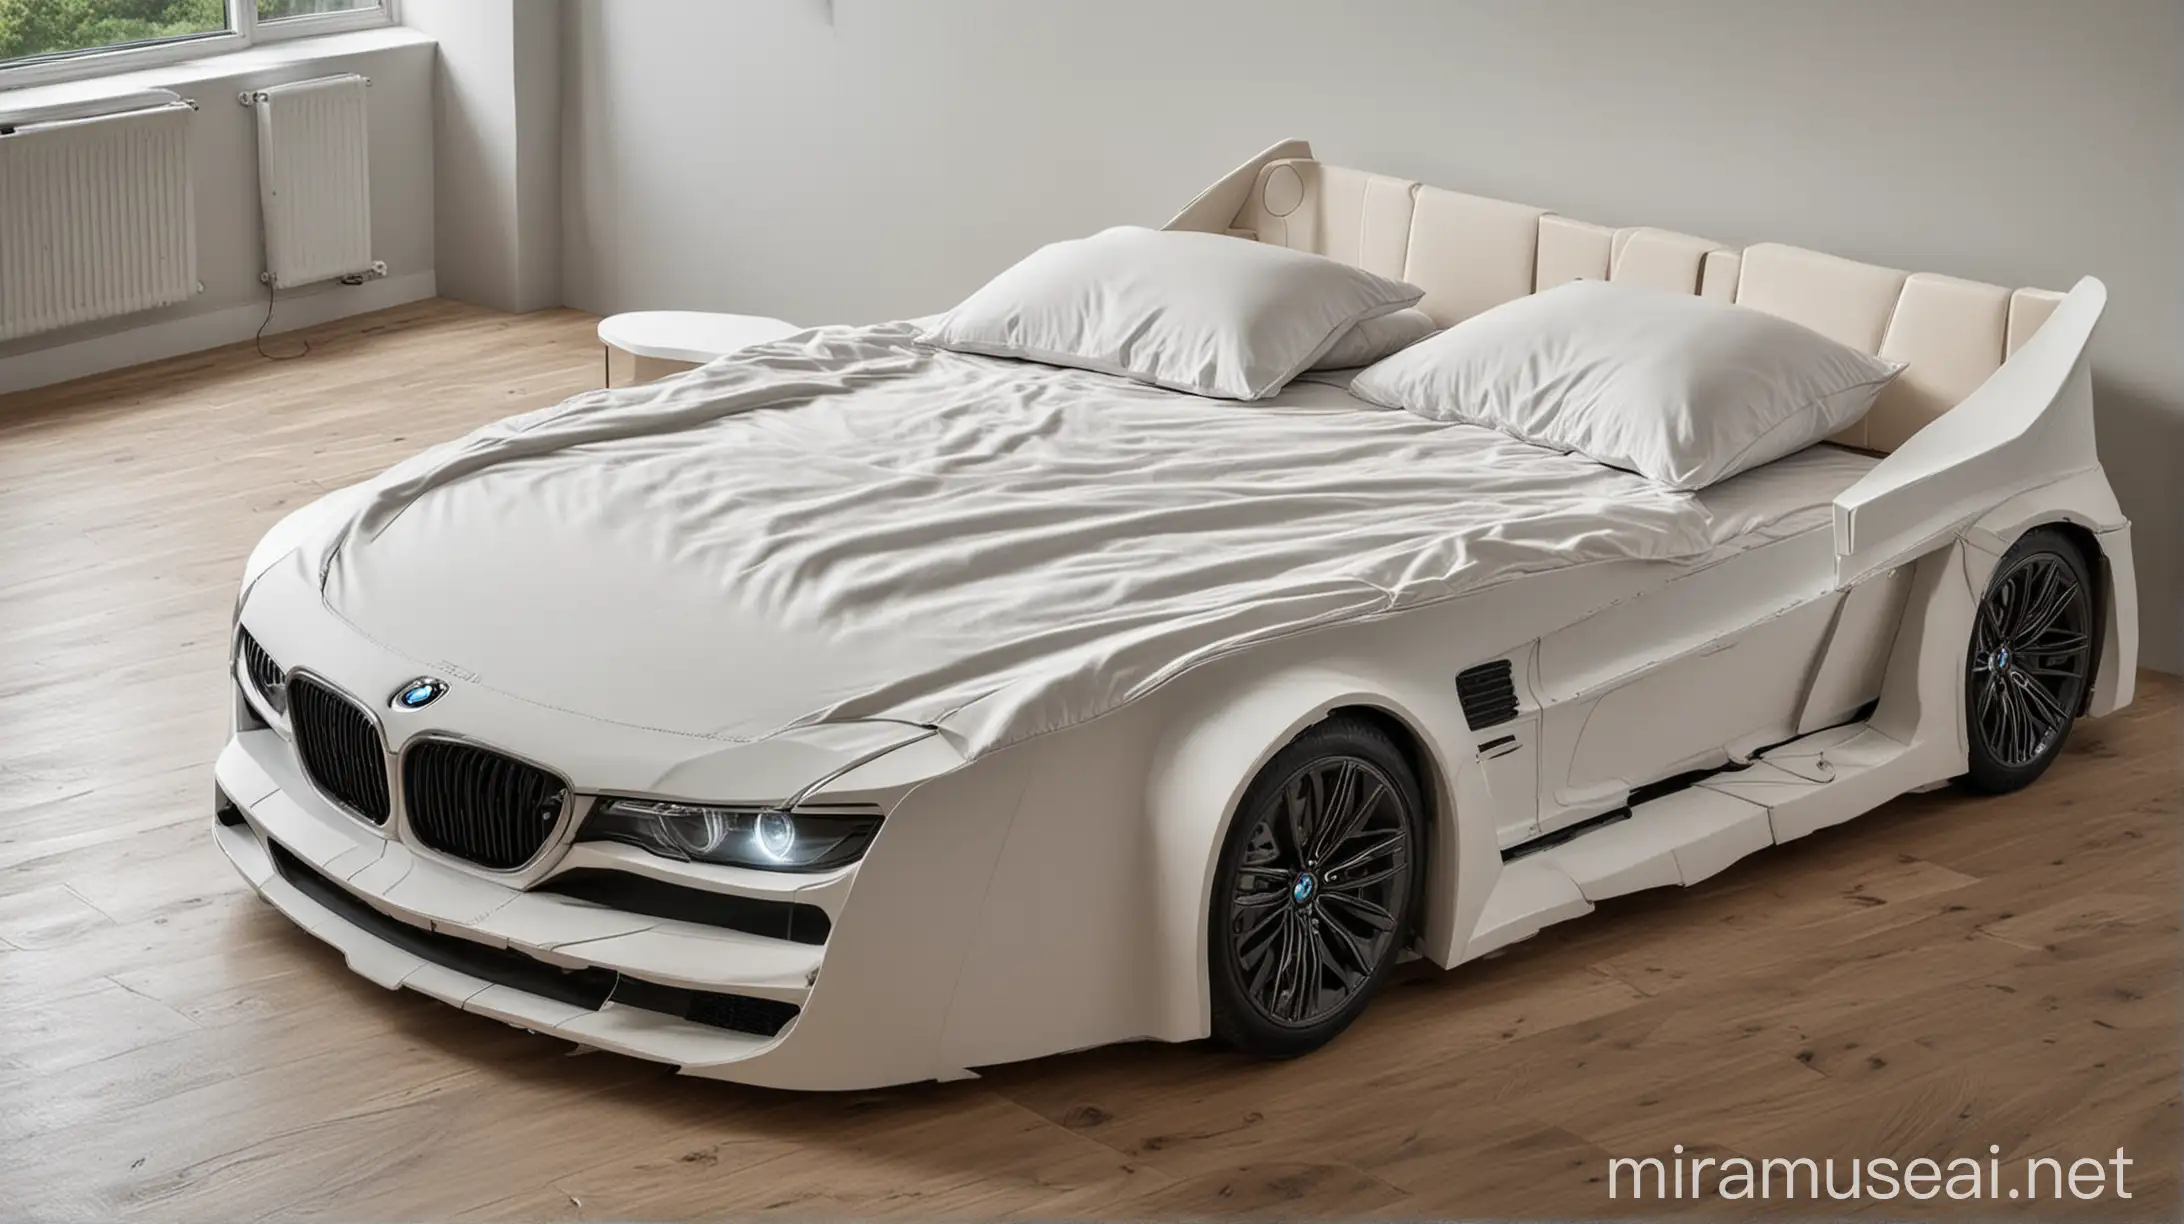 A double bed in the shape of a bmw car.